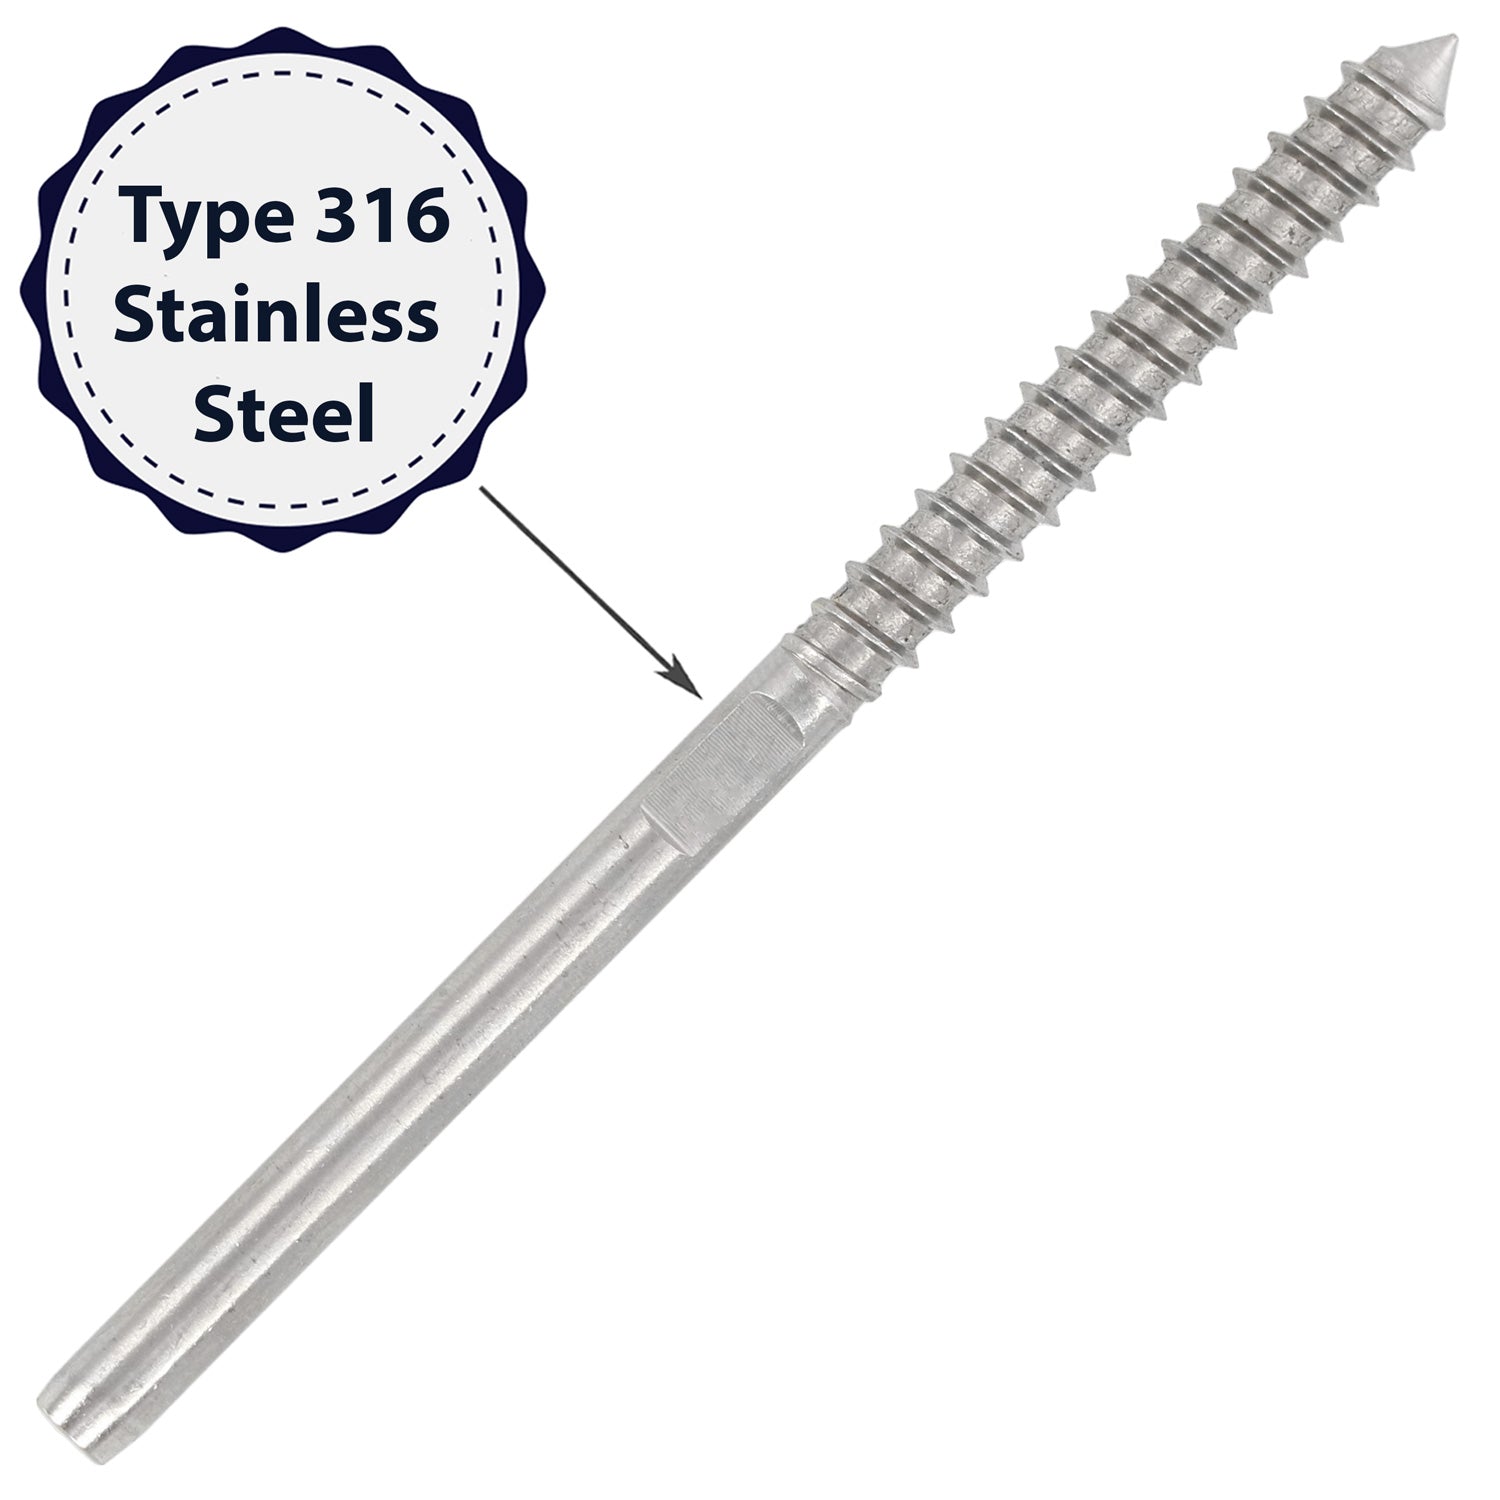 T316 Stainless Steel Lag Screw Swage Stud Hand Swage Lag Screw for 5/32 Cable Railing 25 R, 25 L Swage Lag Screws Left and Right for 5/32 Cable Railing 25 Pairs